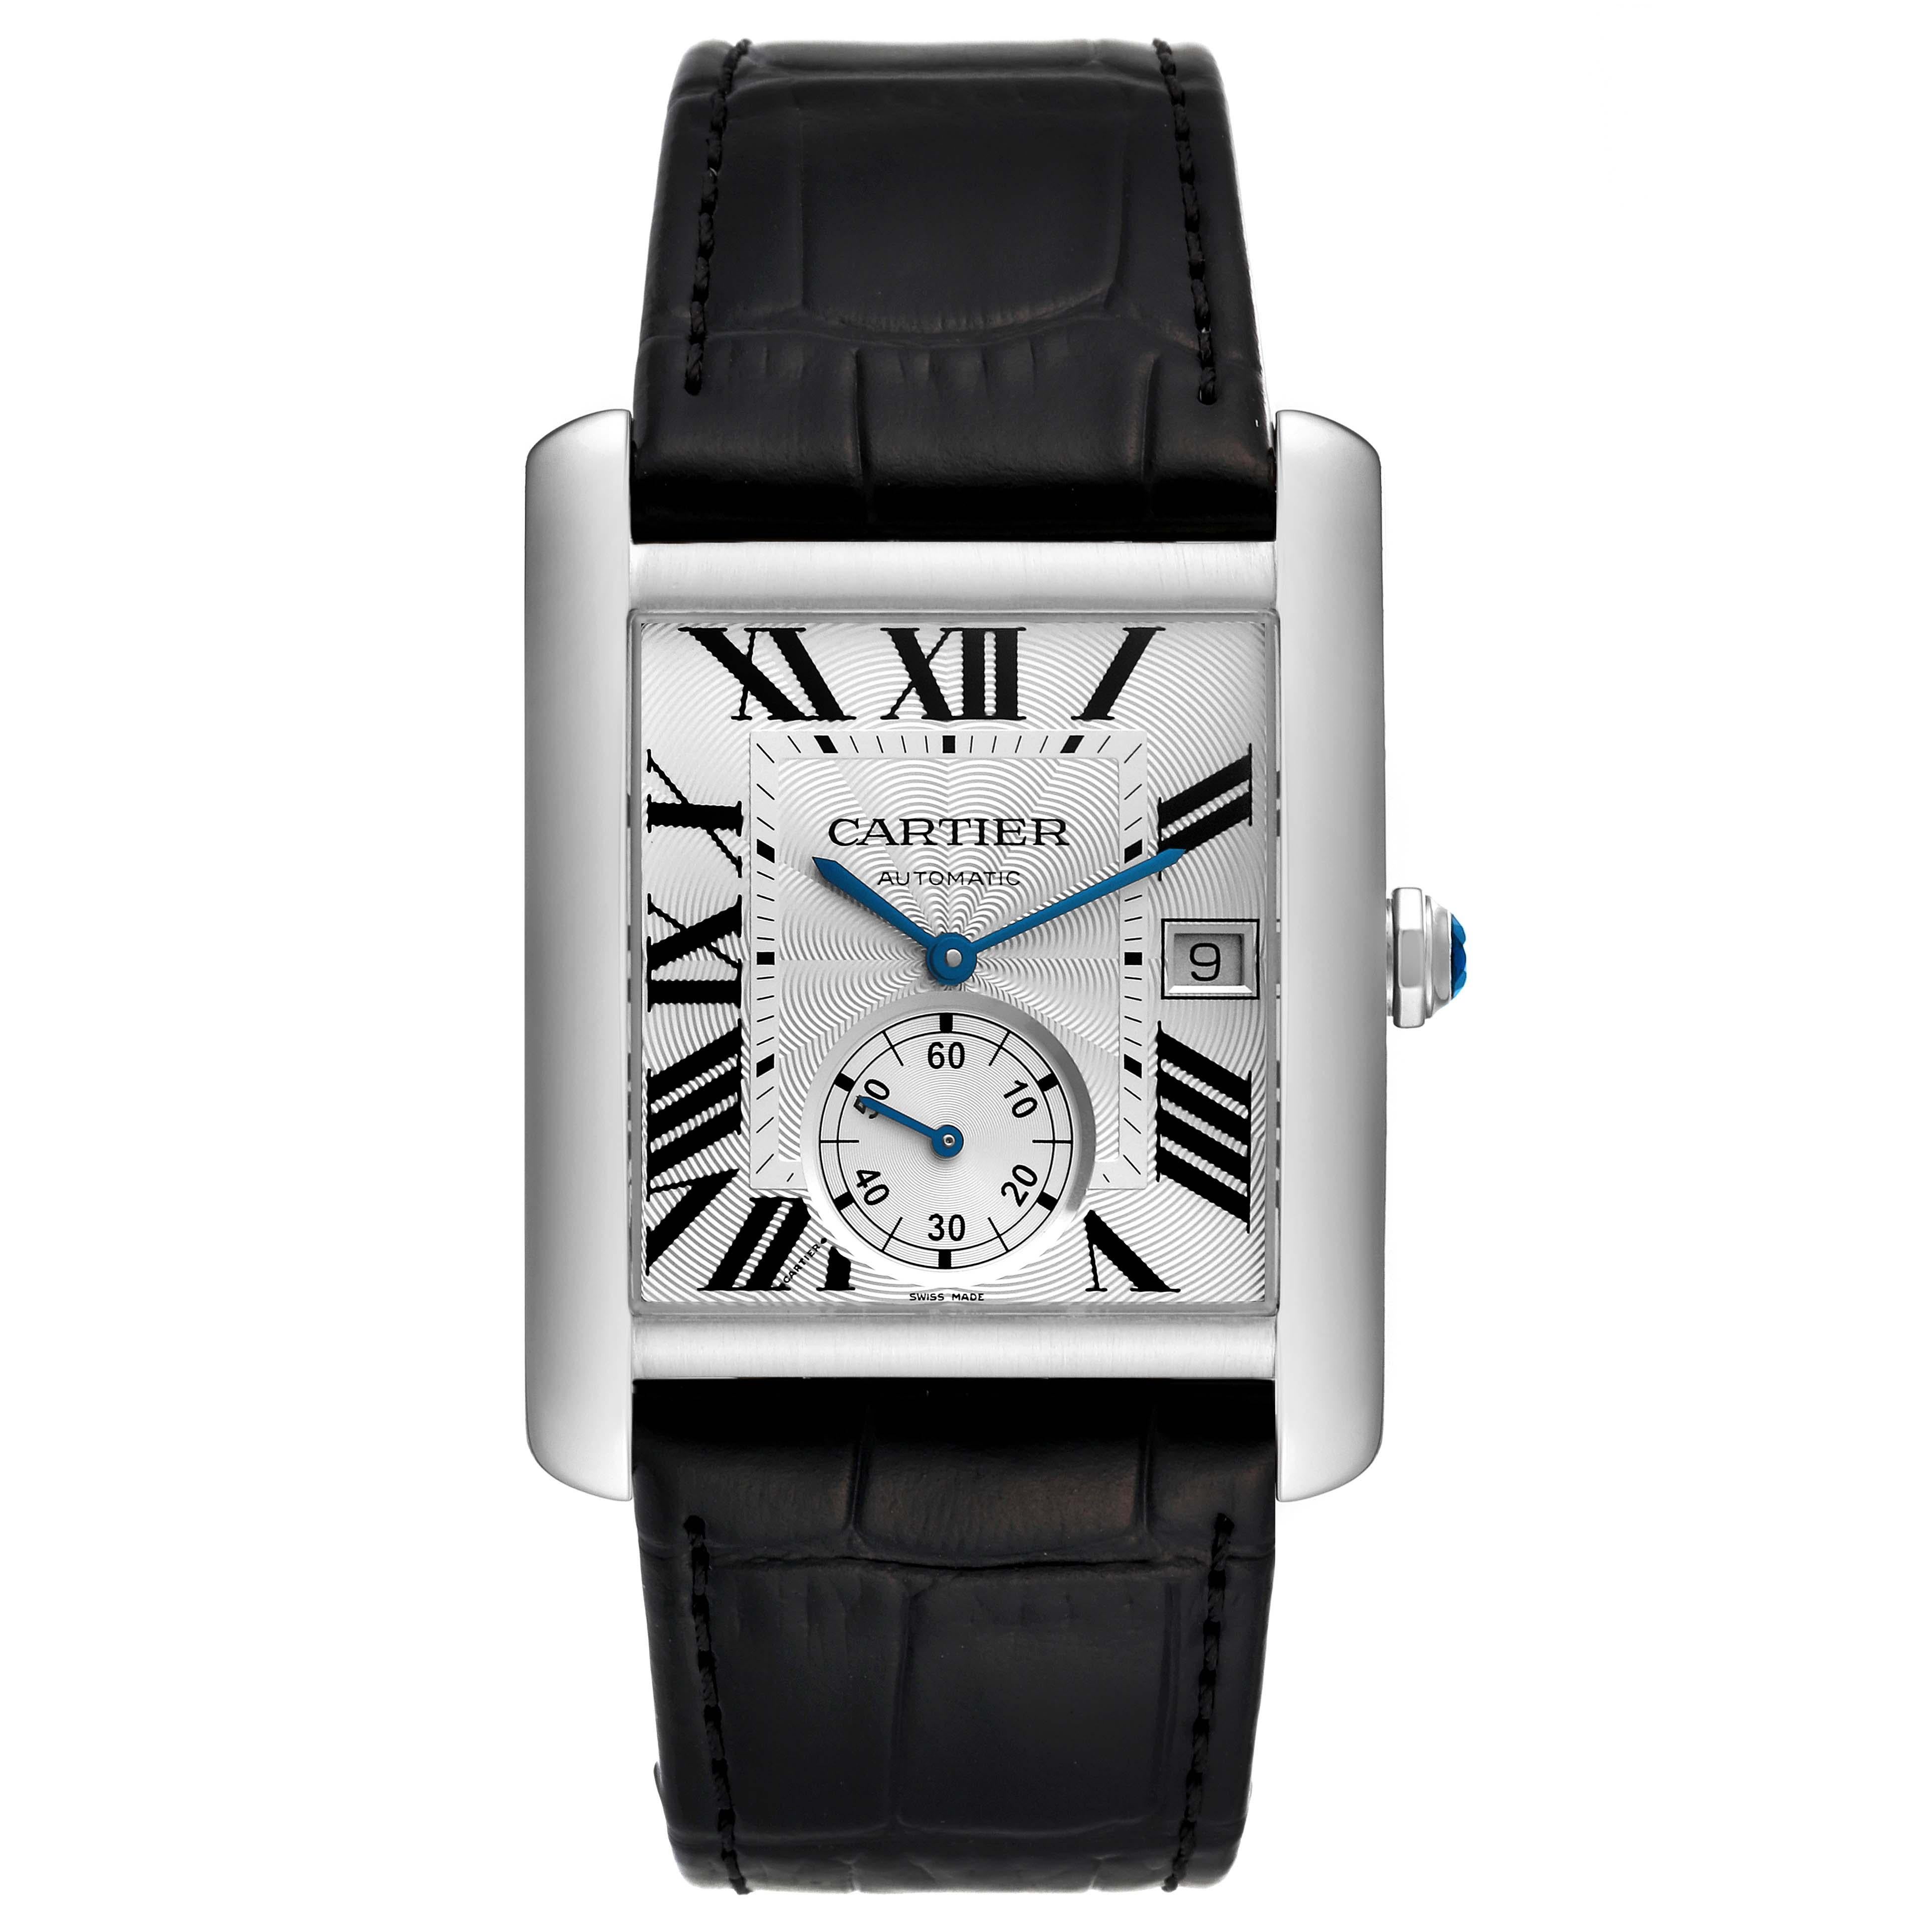 Cartier Tank MC Silver Dial Steel Mens Watch W5330003 Card. Automatic self-winding movement. Three body brushed stainless steel case 34.3 x 44.0 mm. Octagonal crown set with the faceted blue spinel. Exhibition transparent sapphire crystal caseback.